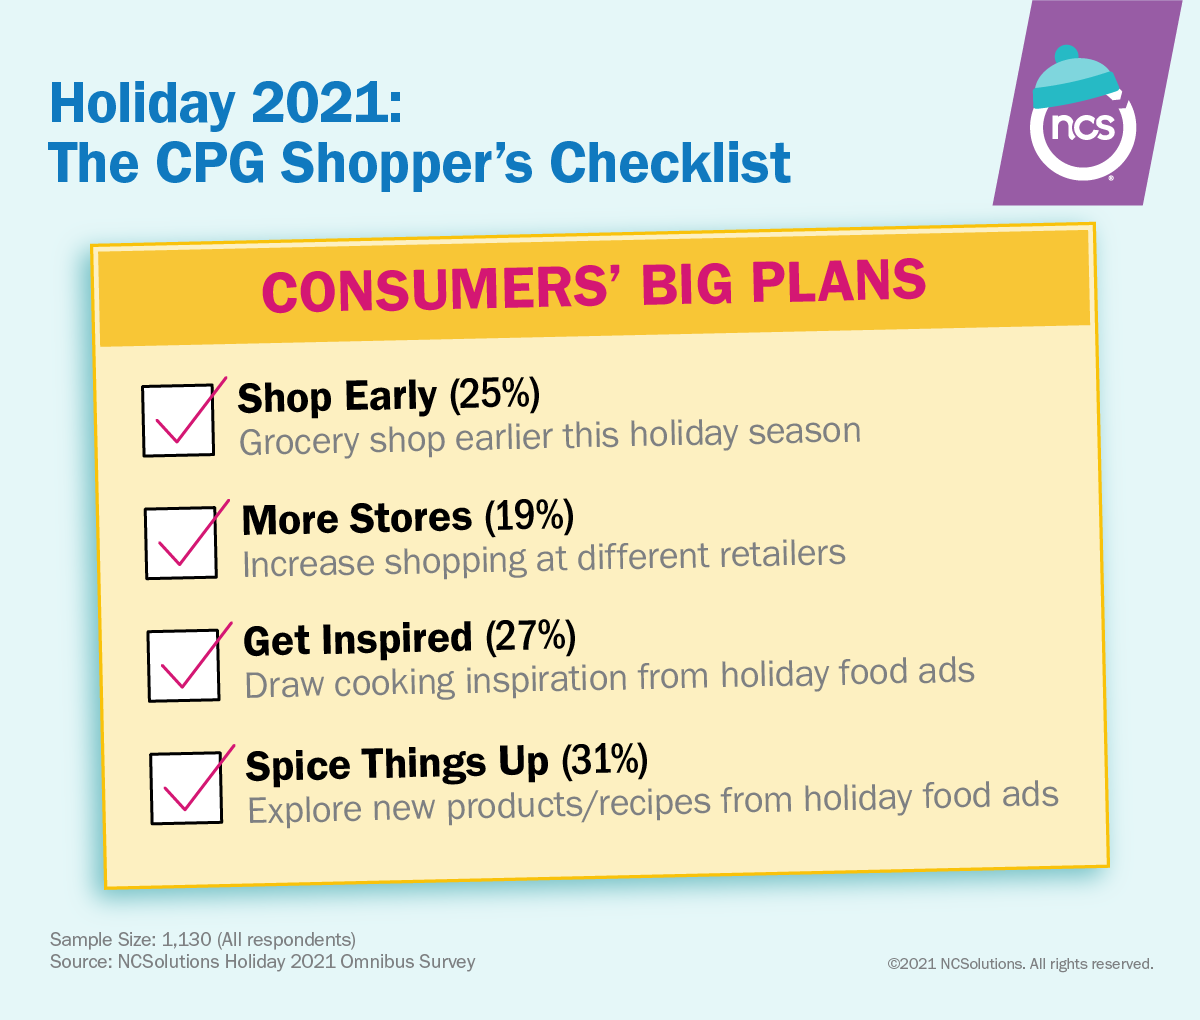 NCSolutions Holiday 2021 survey shows Americans plan to grocery shop early, at more stores, and to get inspired by holiday ads